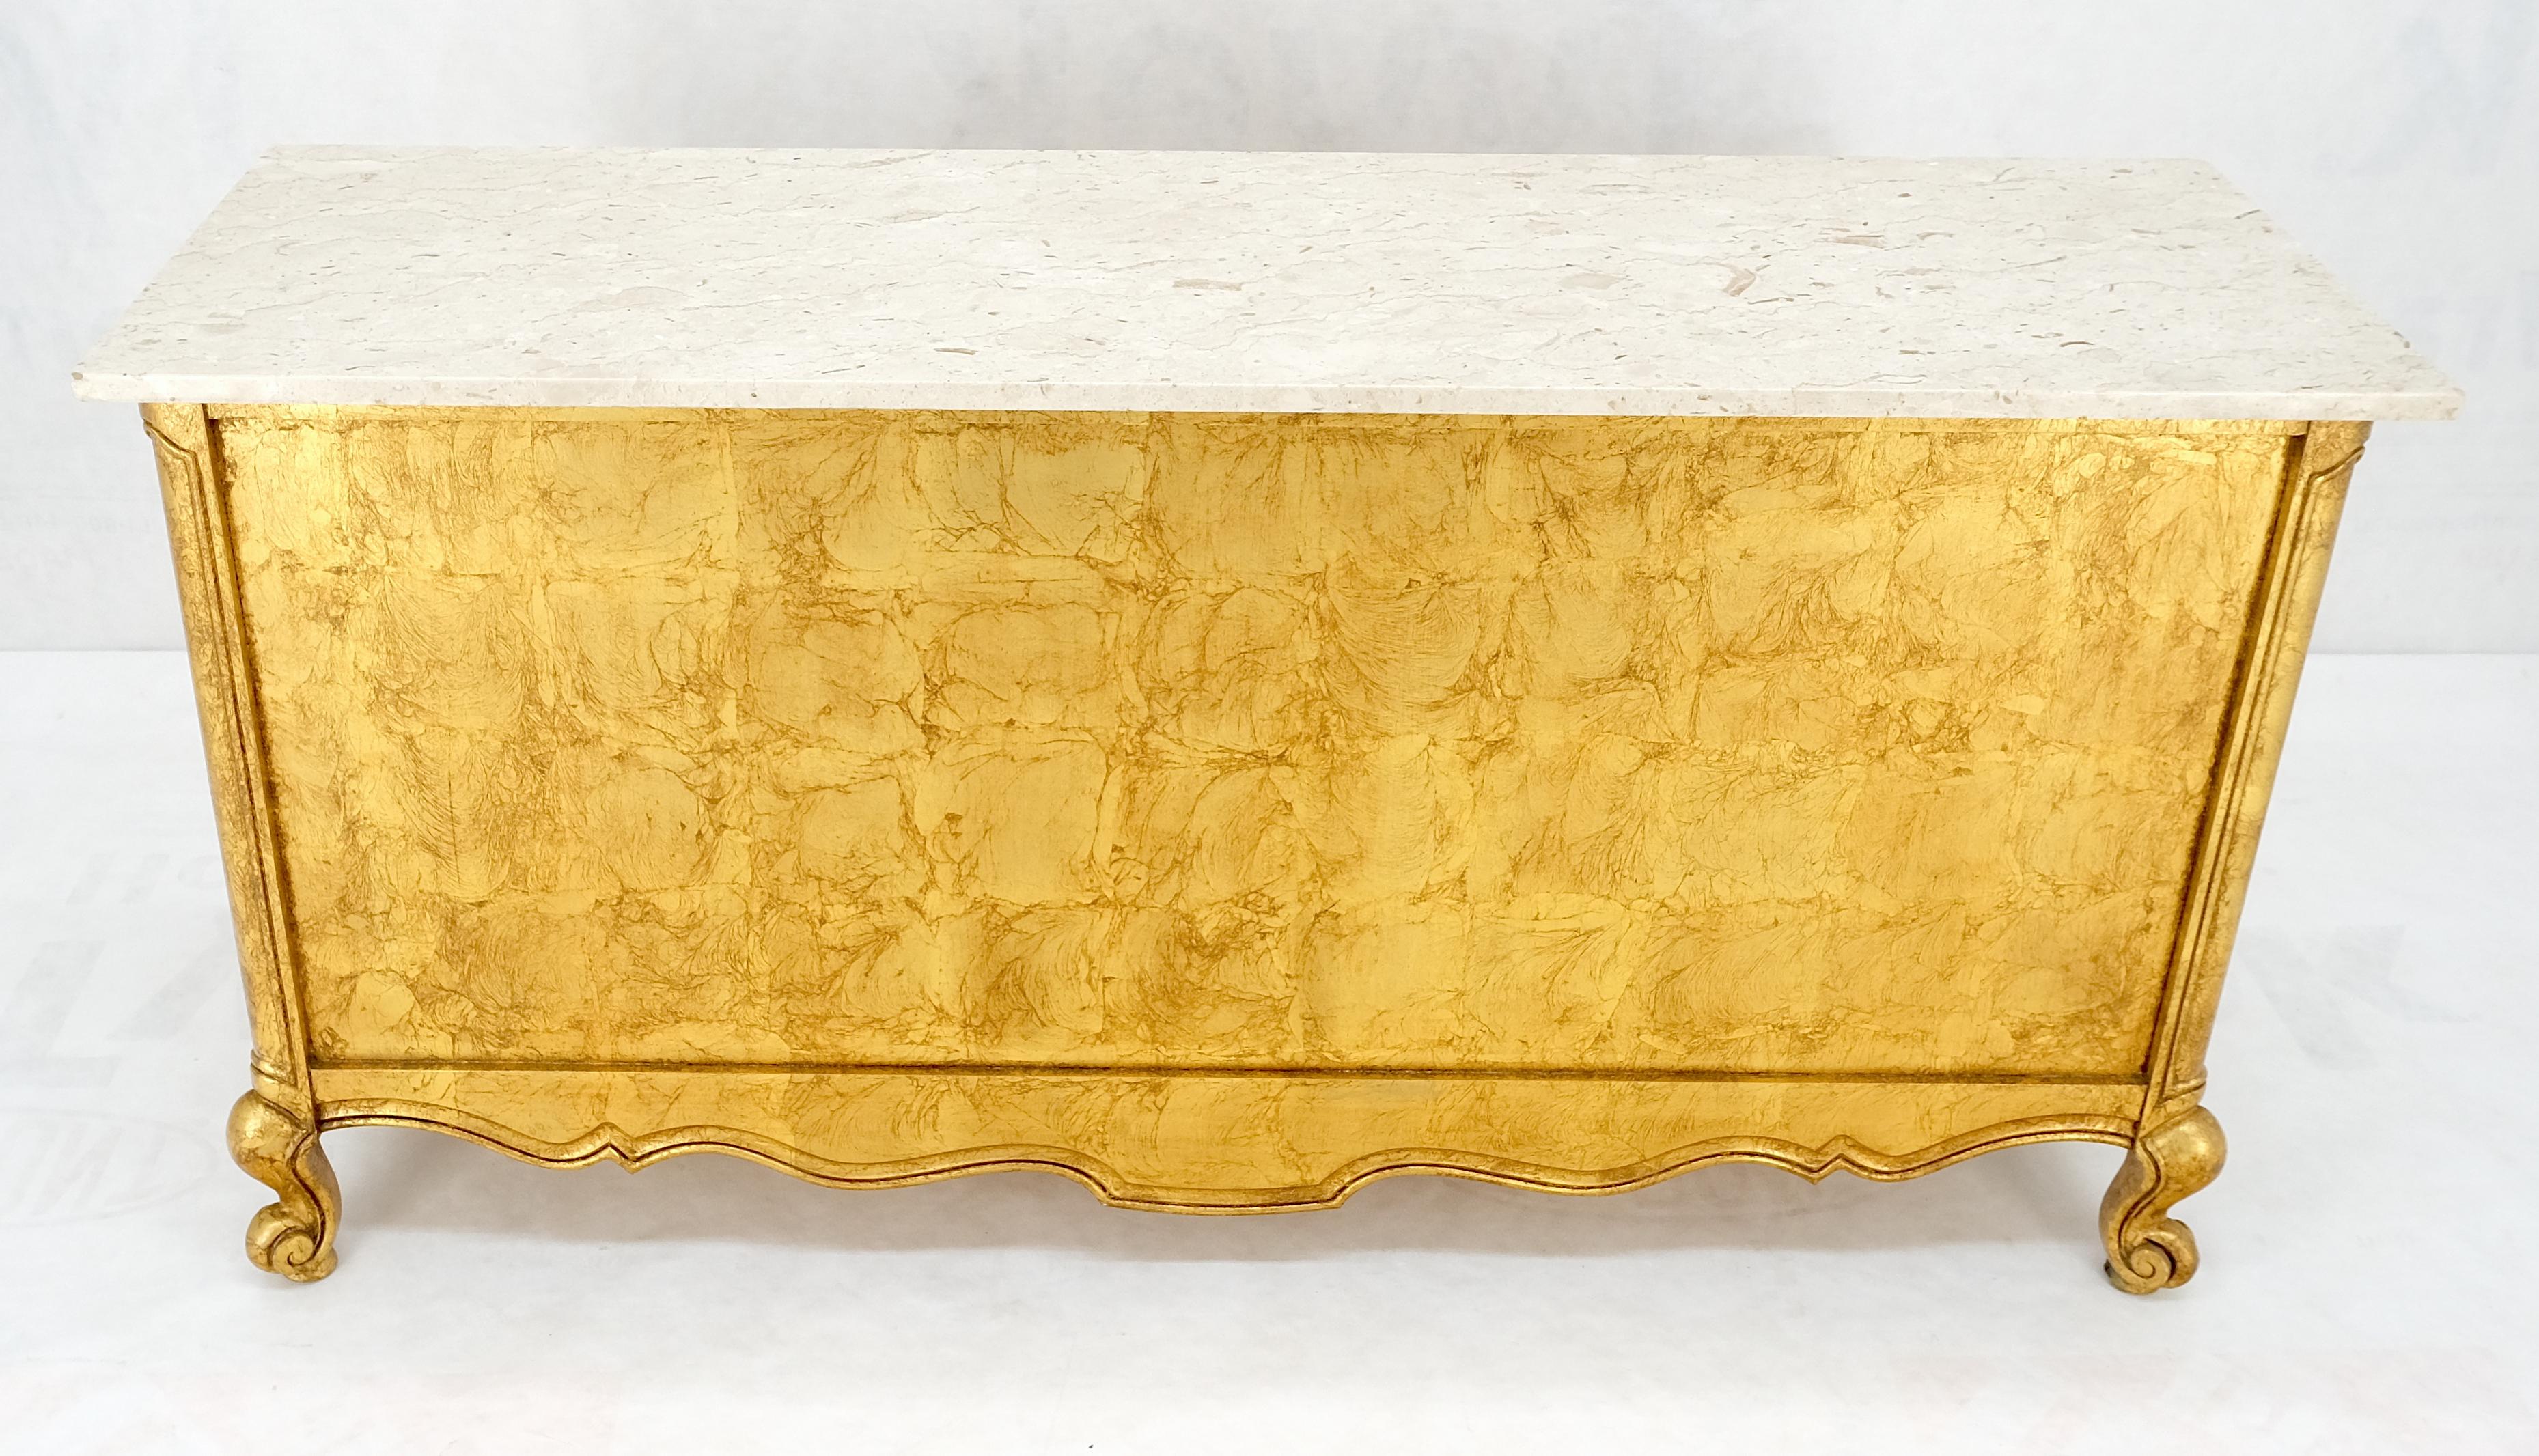 Gold Gilt Finished Back Marble Top Double Door Server Credenza Dresser MINT!
Phenomenal faux gold gilt finish cabinet.